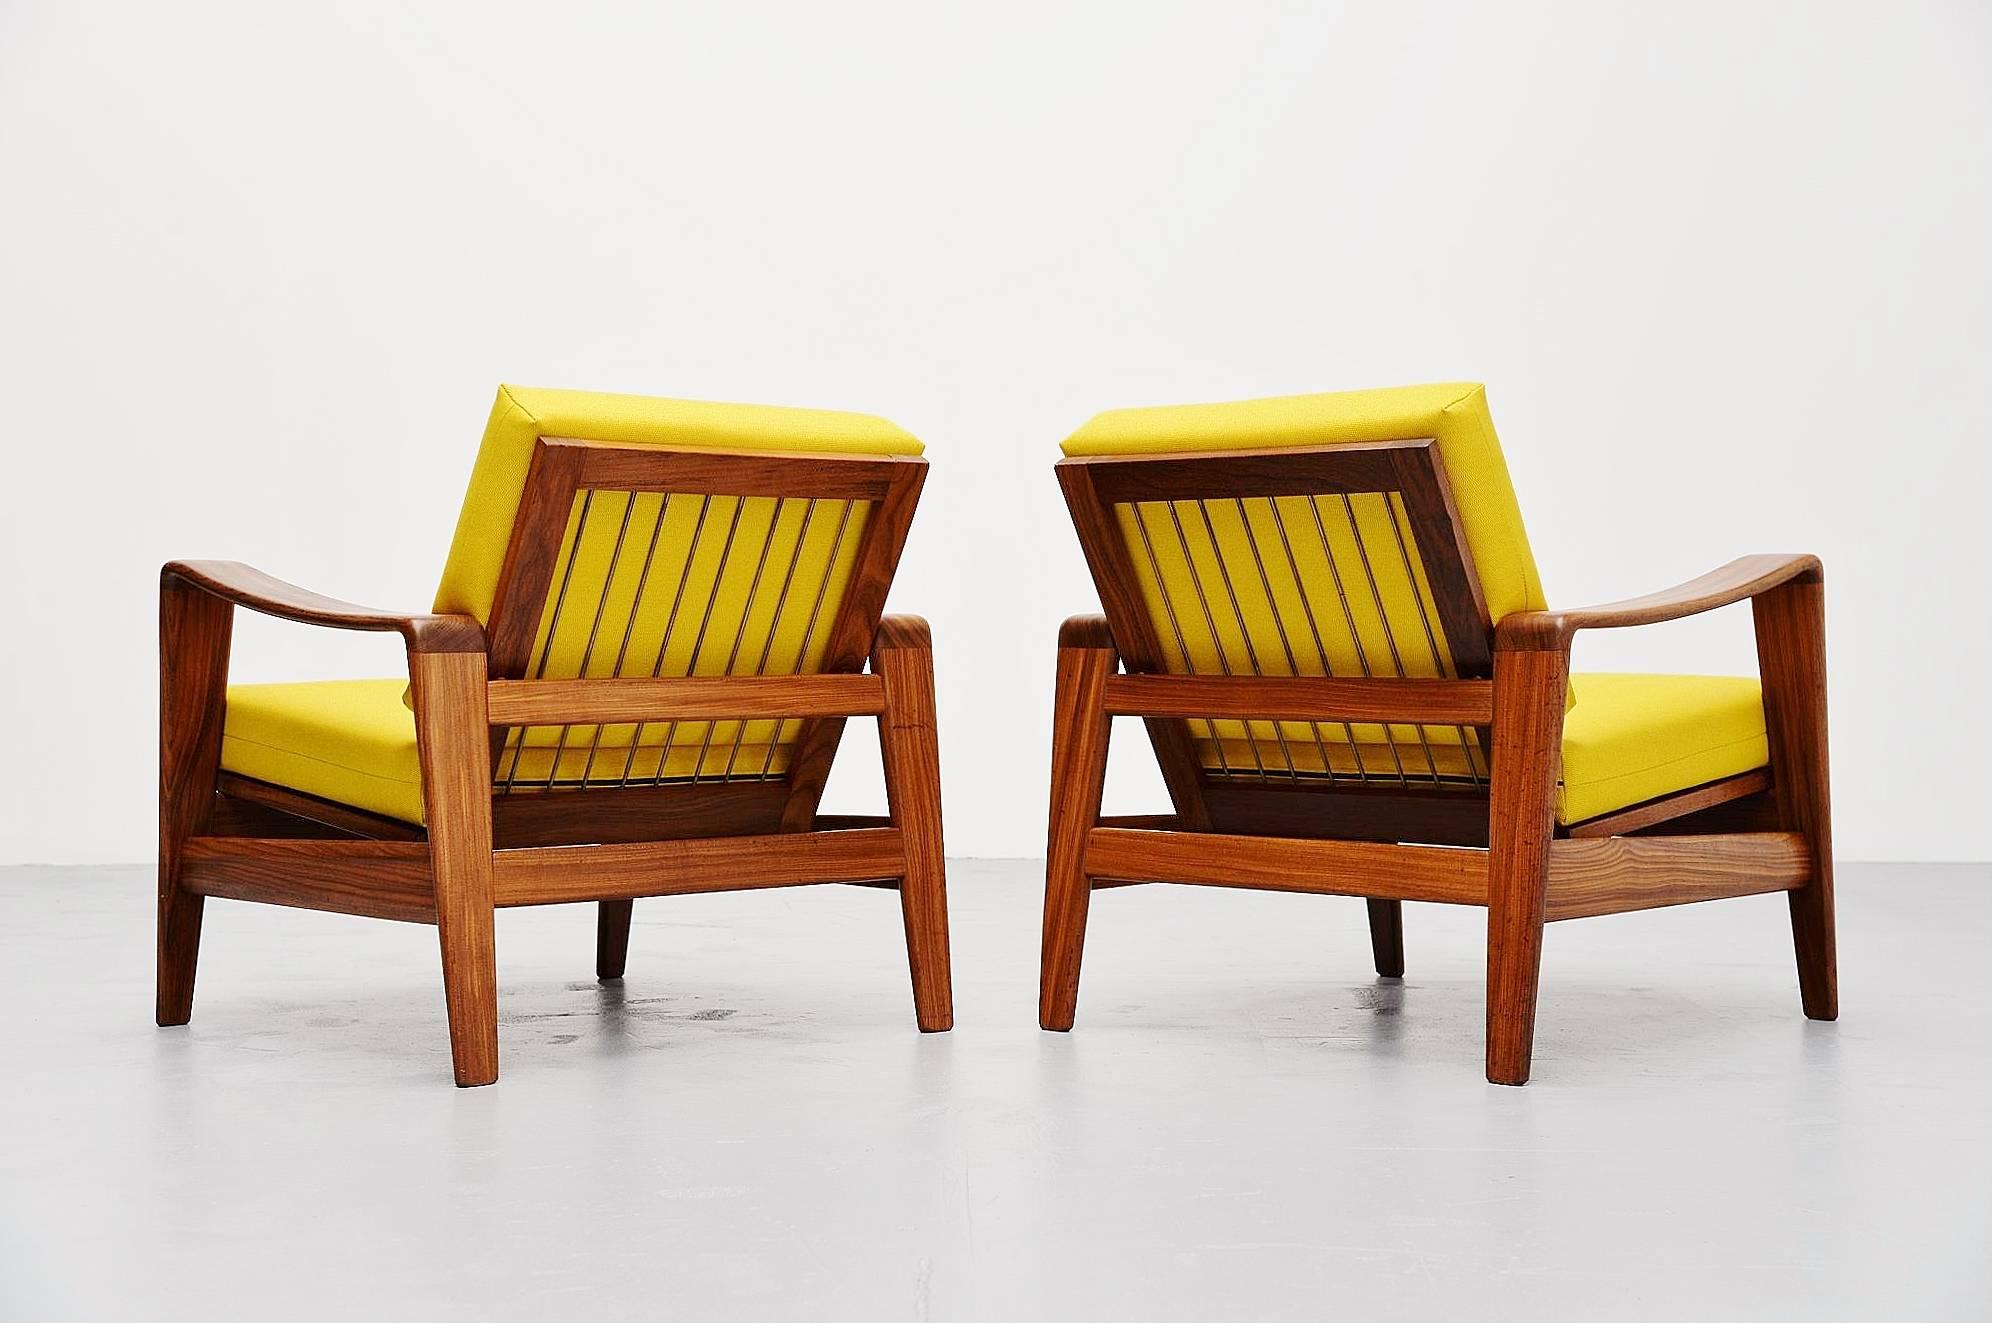 Pair of easy chairs designed by Arne Wahl Iversen, manufactured by Komfort, Denmark, 1960. These chairs have solid teak wooden frames and yellow upholstered cushions. These organic and dynamic shaped chairs look great in contrast. Nicely shaped